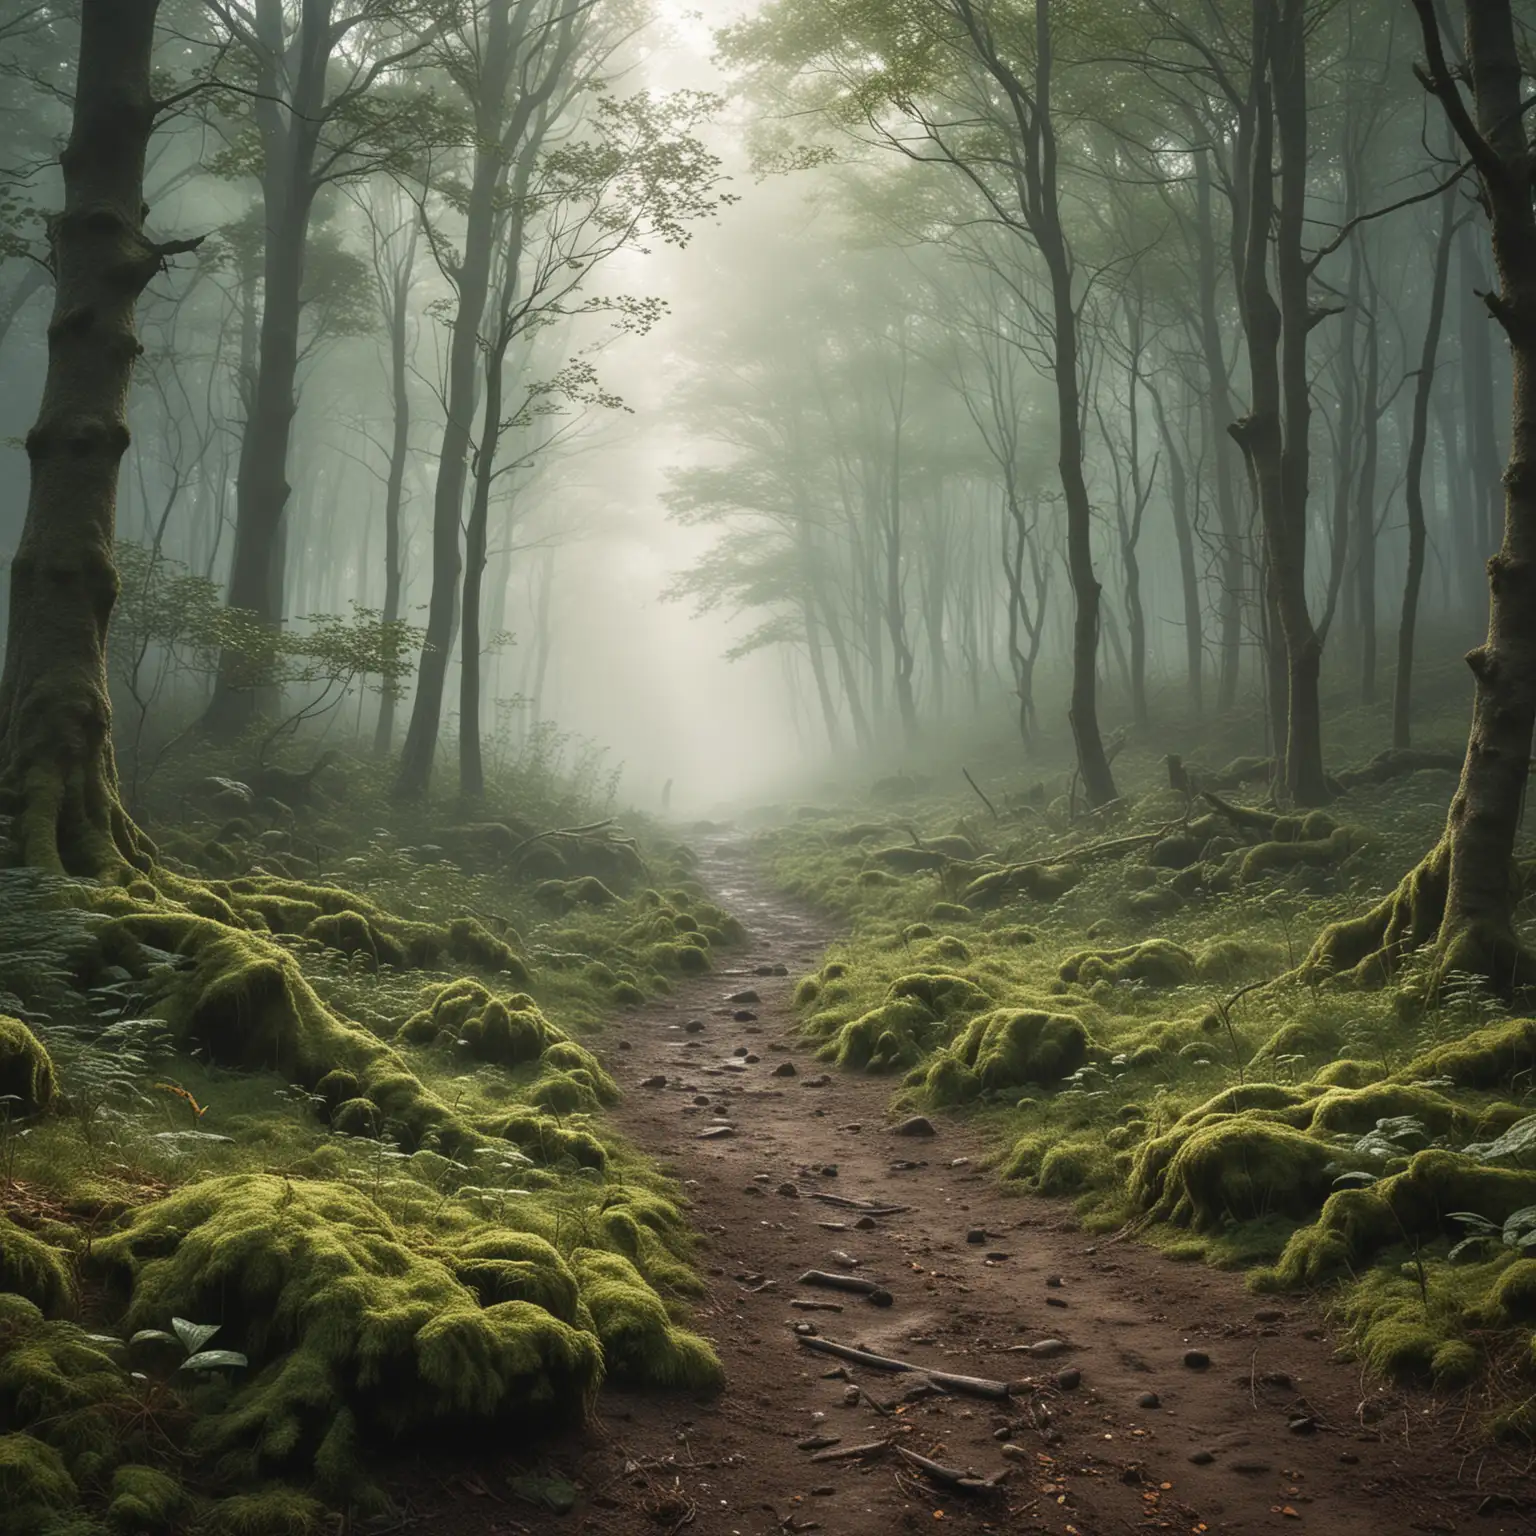 create a fantasy forest scene with a little ground mist sweeping through 





